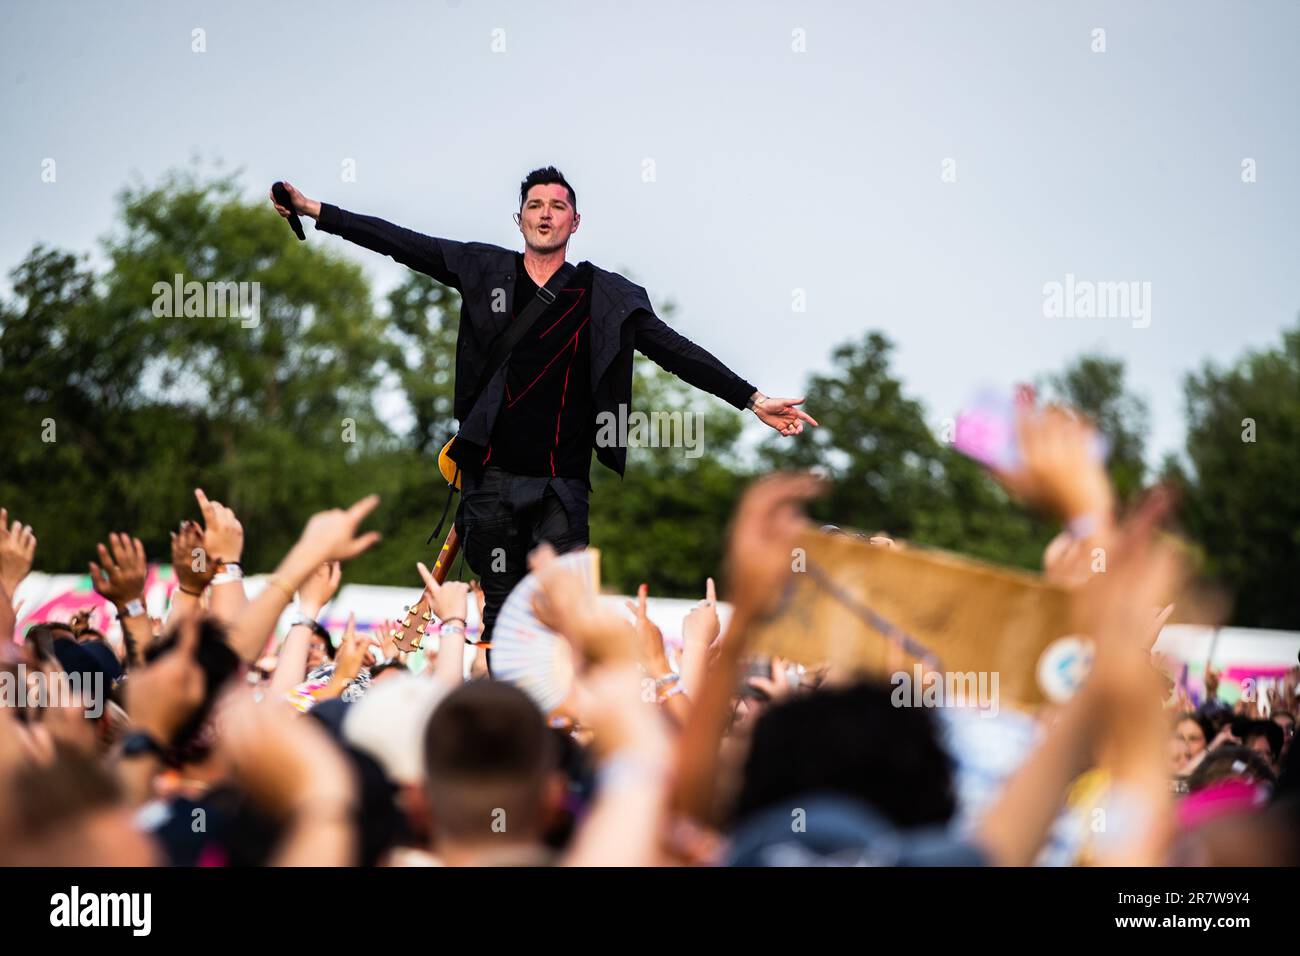 LANDGRAAF - The Irish rock band The Script with lead singer, guitarist and keyboardist Danny O'Donoghue will perform during the second day of the 52nd edition of Pinkpop. ANP PAUL BERGEN netherlands out - belgium out Stock Photo